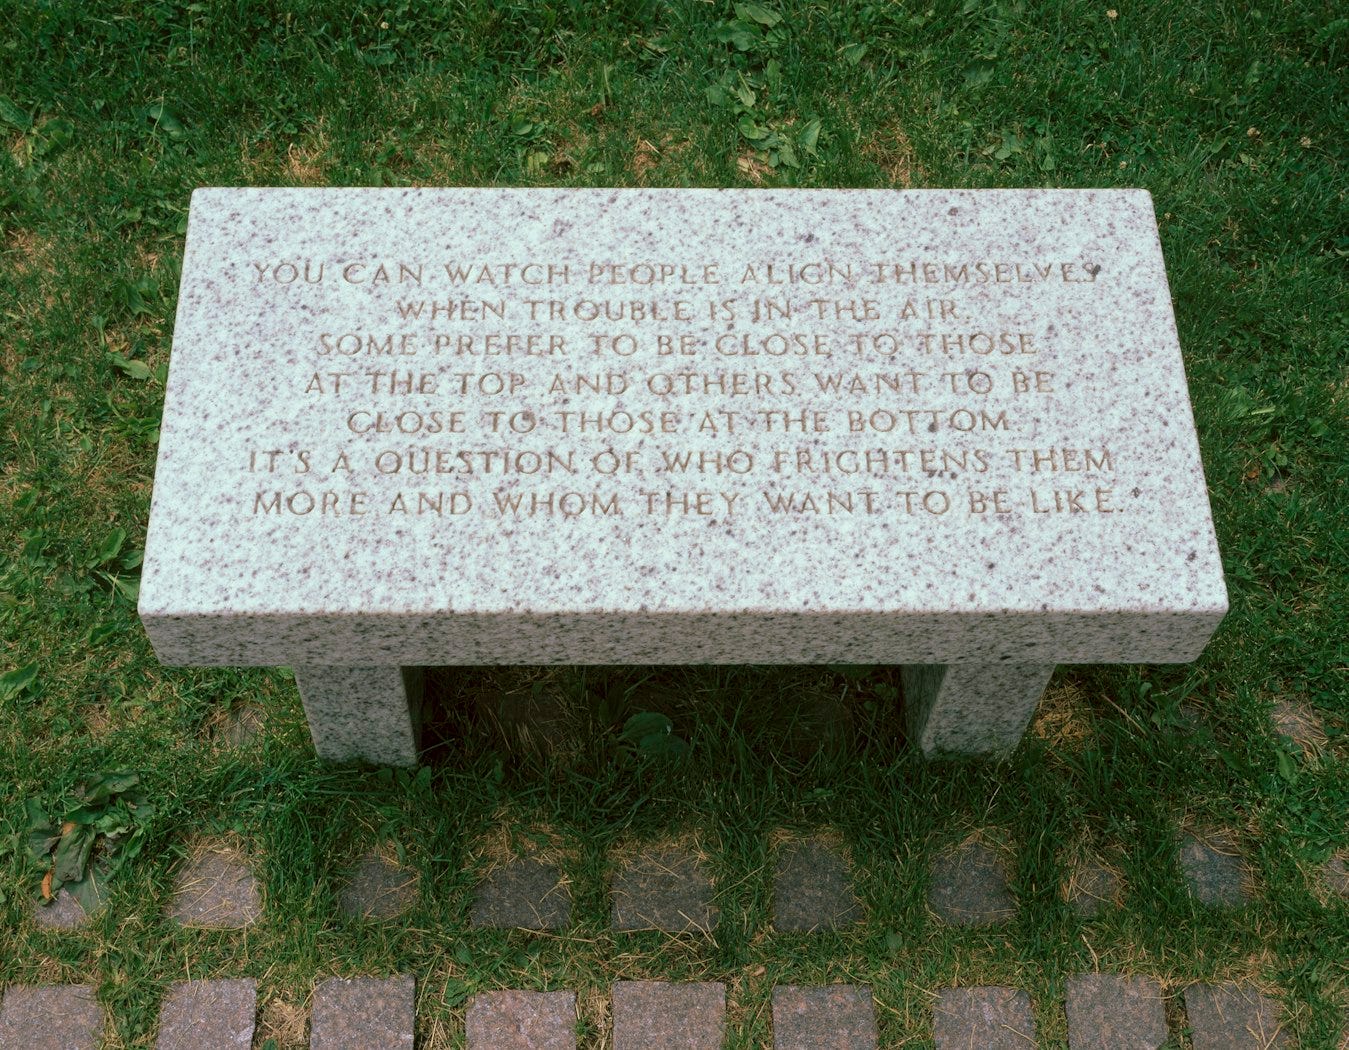 A small grey marble bench sitting outside is engraved with the words from the title.